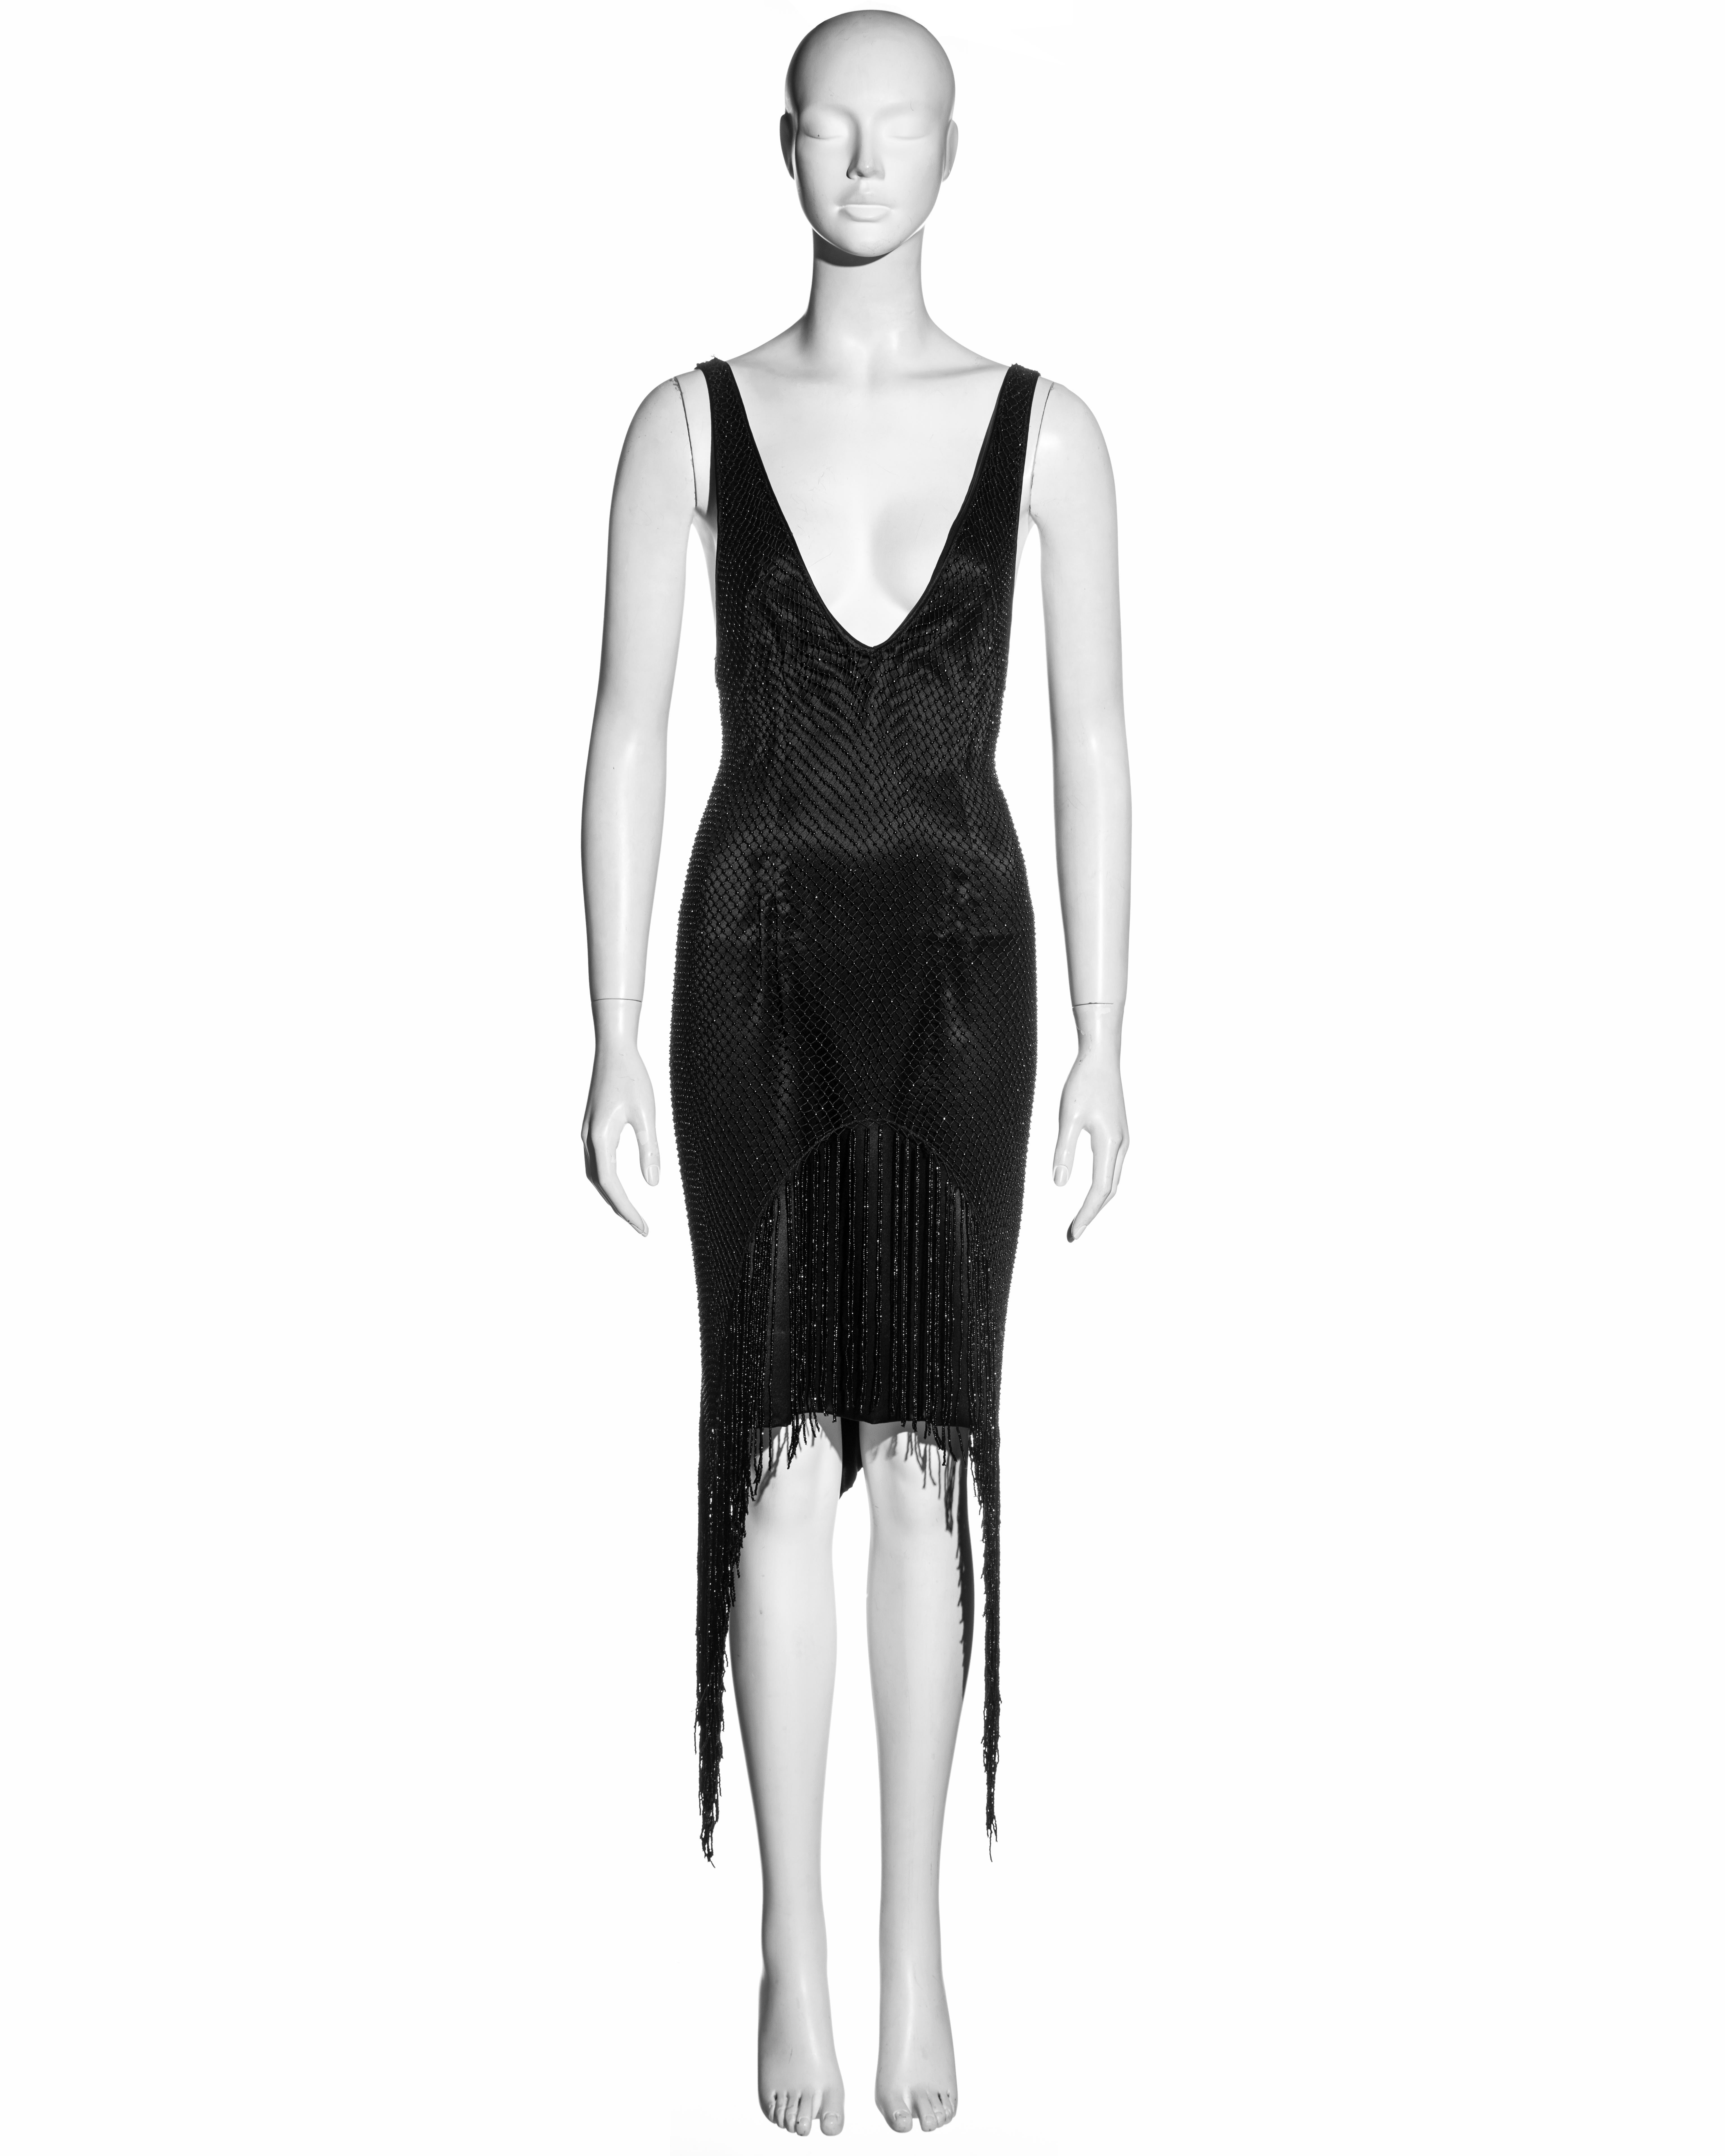 ▪ Gucci black silk evening dress
▪ Designed by Tom Ford
▪ Plunging v-neck
▪ Beaded net overlay 
▪ Beaded fringe trim 
▪ New with tags 
▪ IT 42 - FR 38 - UK 10 - US 6
▪ 100% Silk, 100% Rayon
▪ Fall-Winter 2002